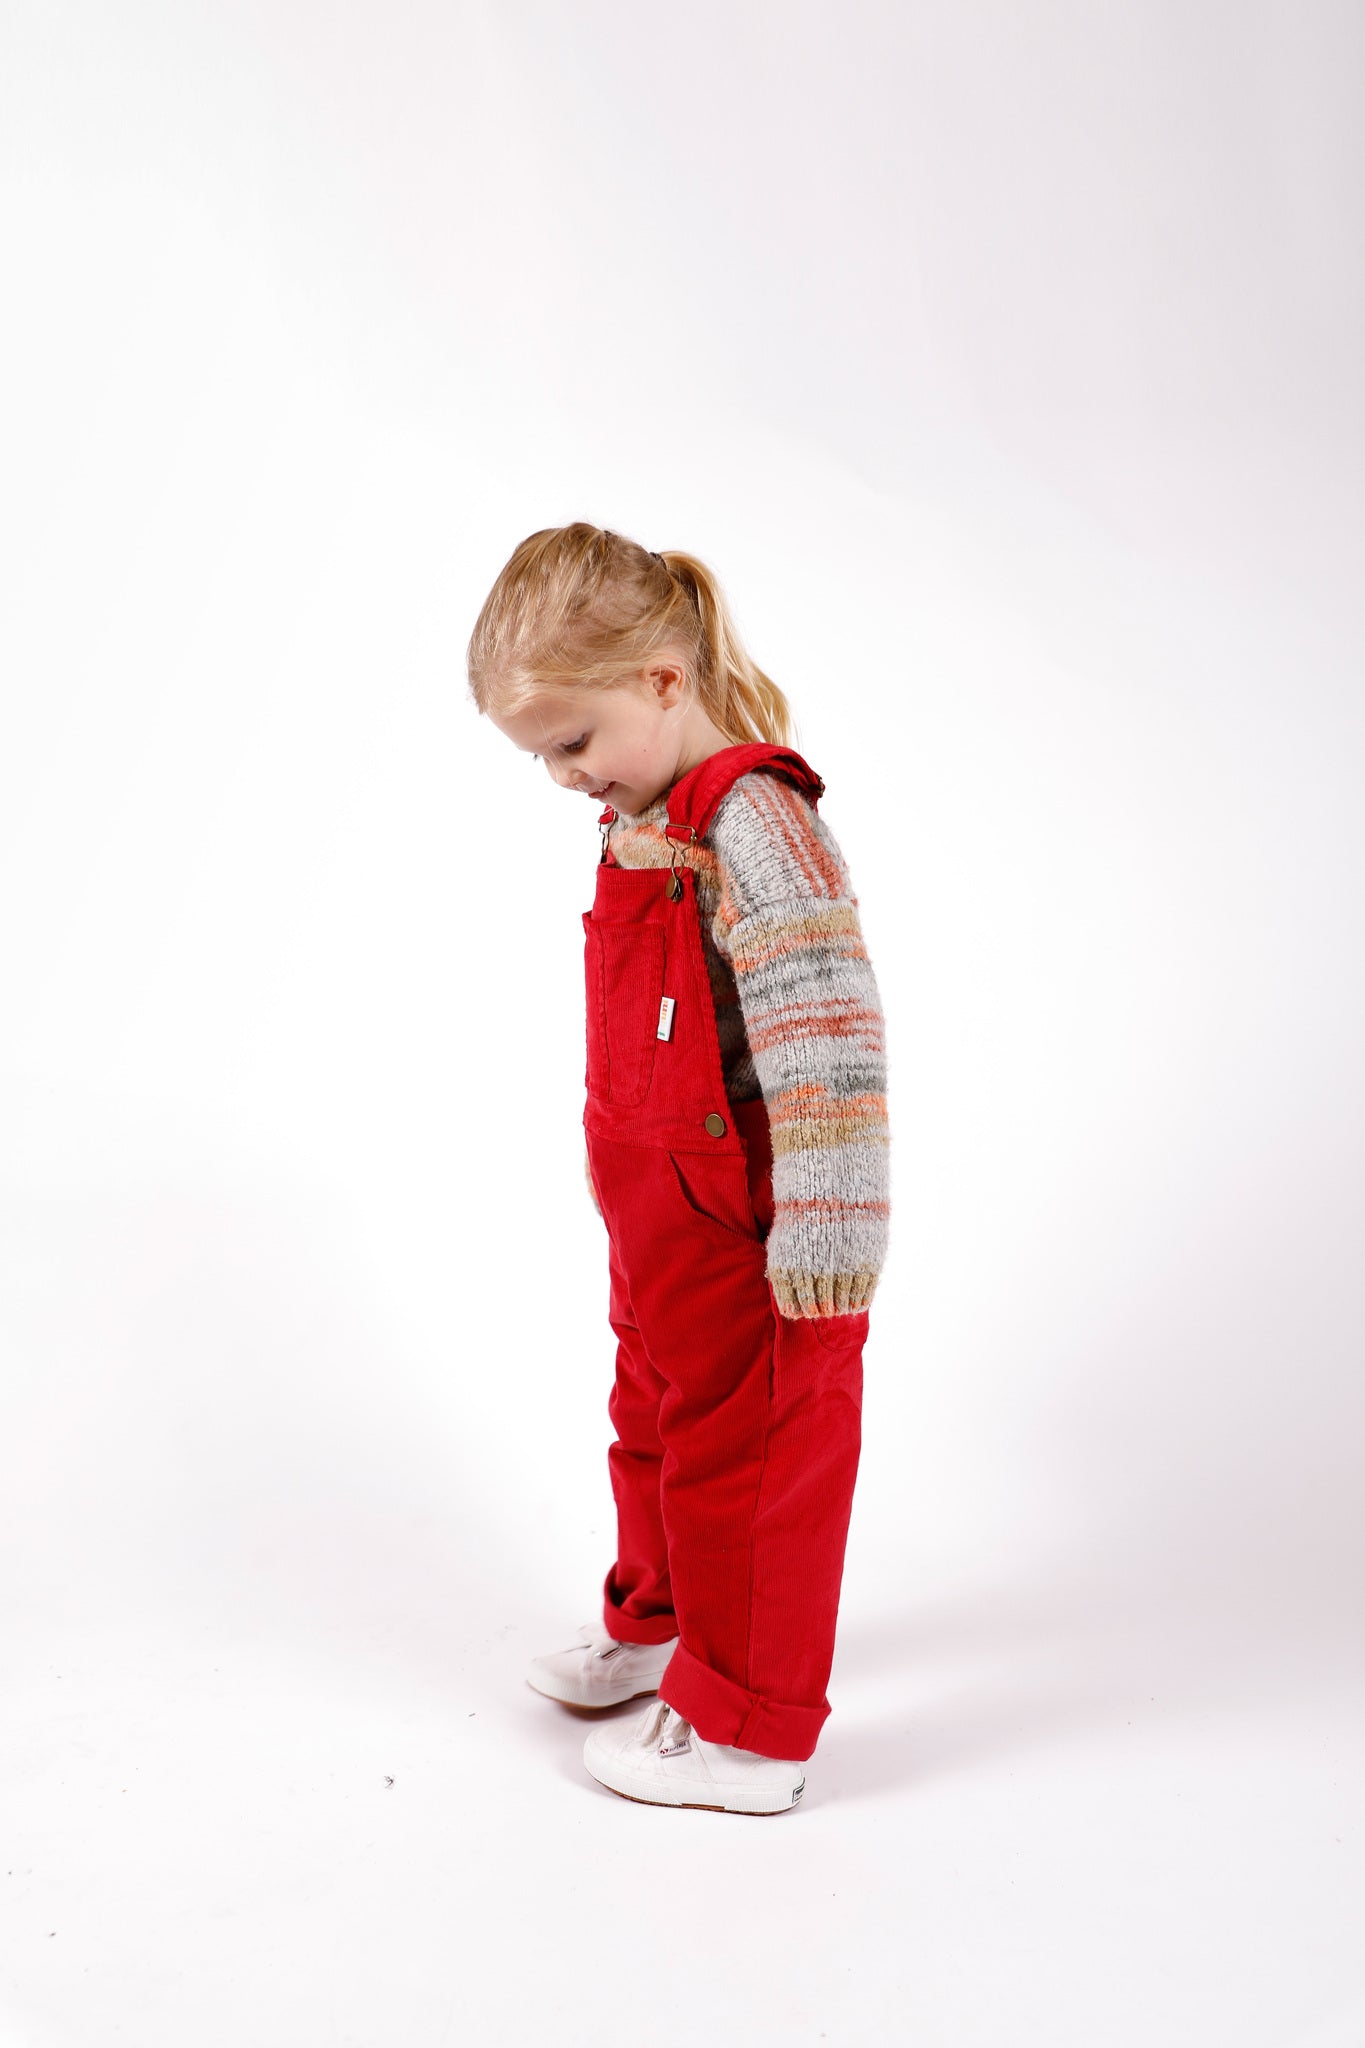 The Dungaree - Organic Cotton Cord - Red